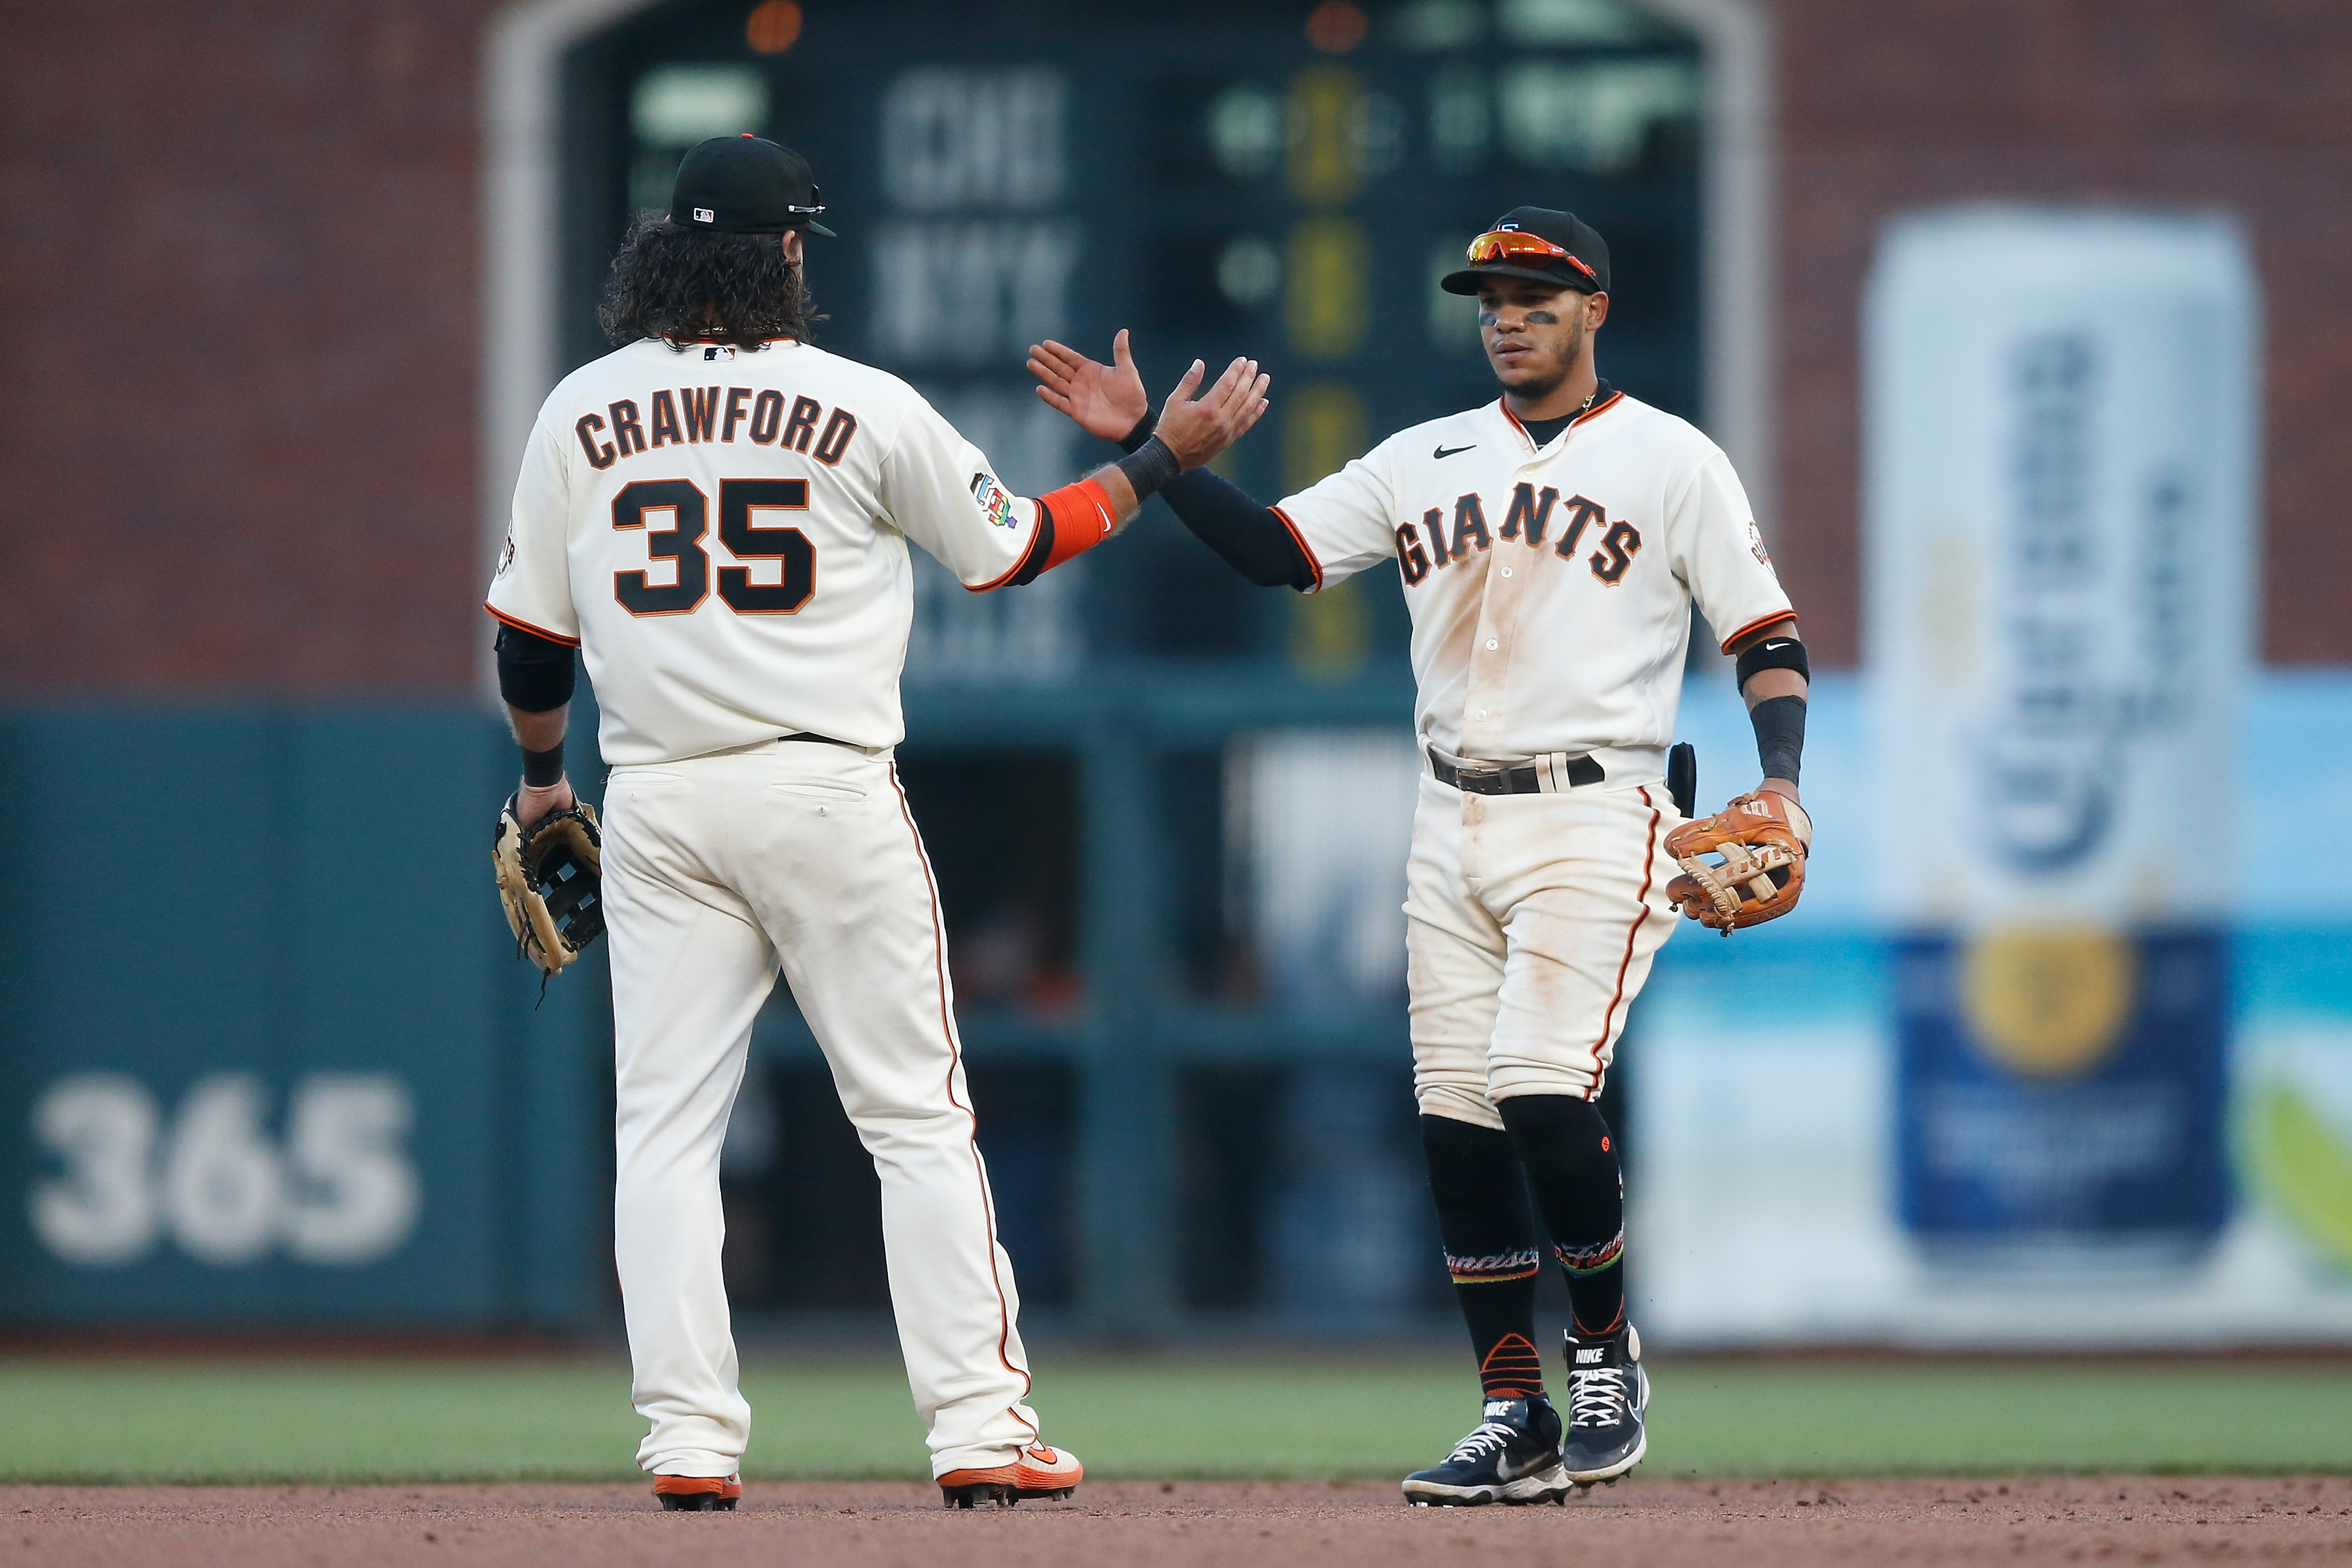 A photo of Thairo Estrada and Brandon Crawford high-fiving after the Giants beat the Dodgers 3-2 on Saturday night.